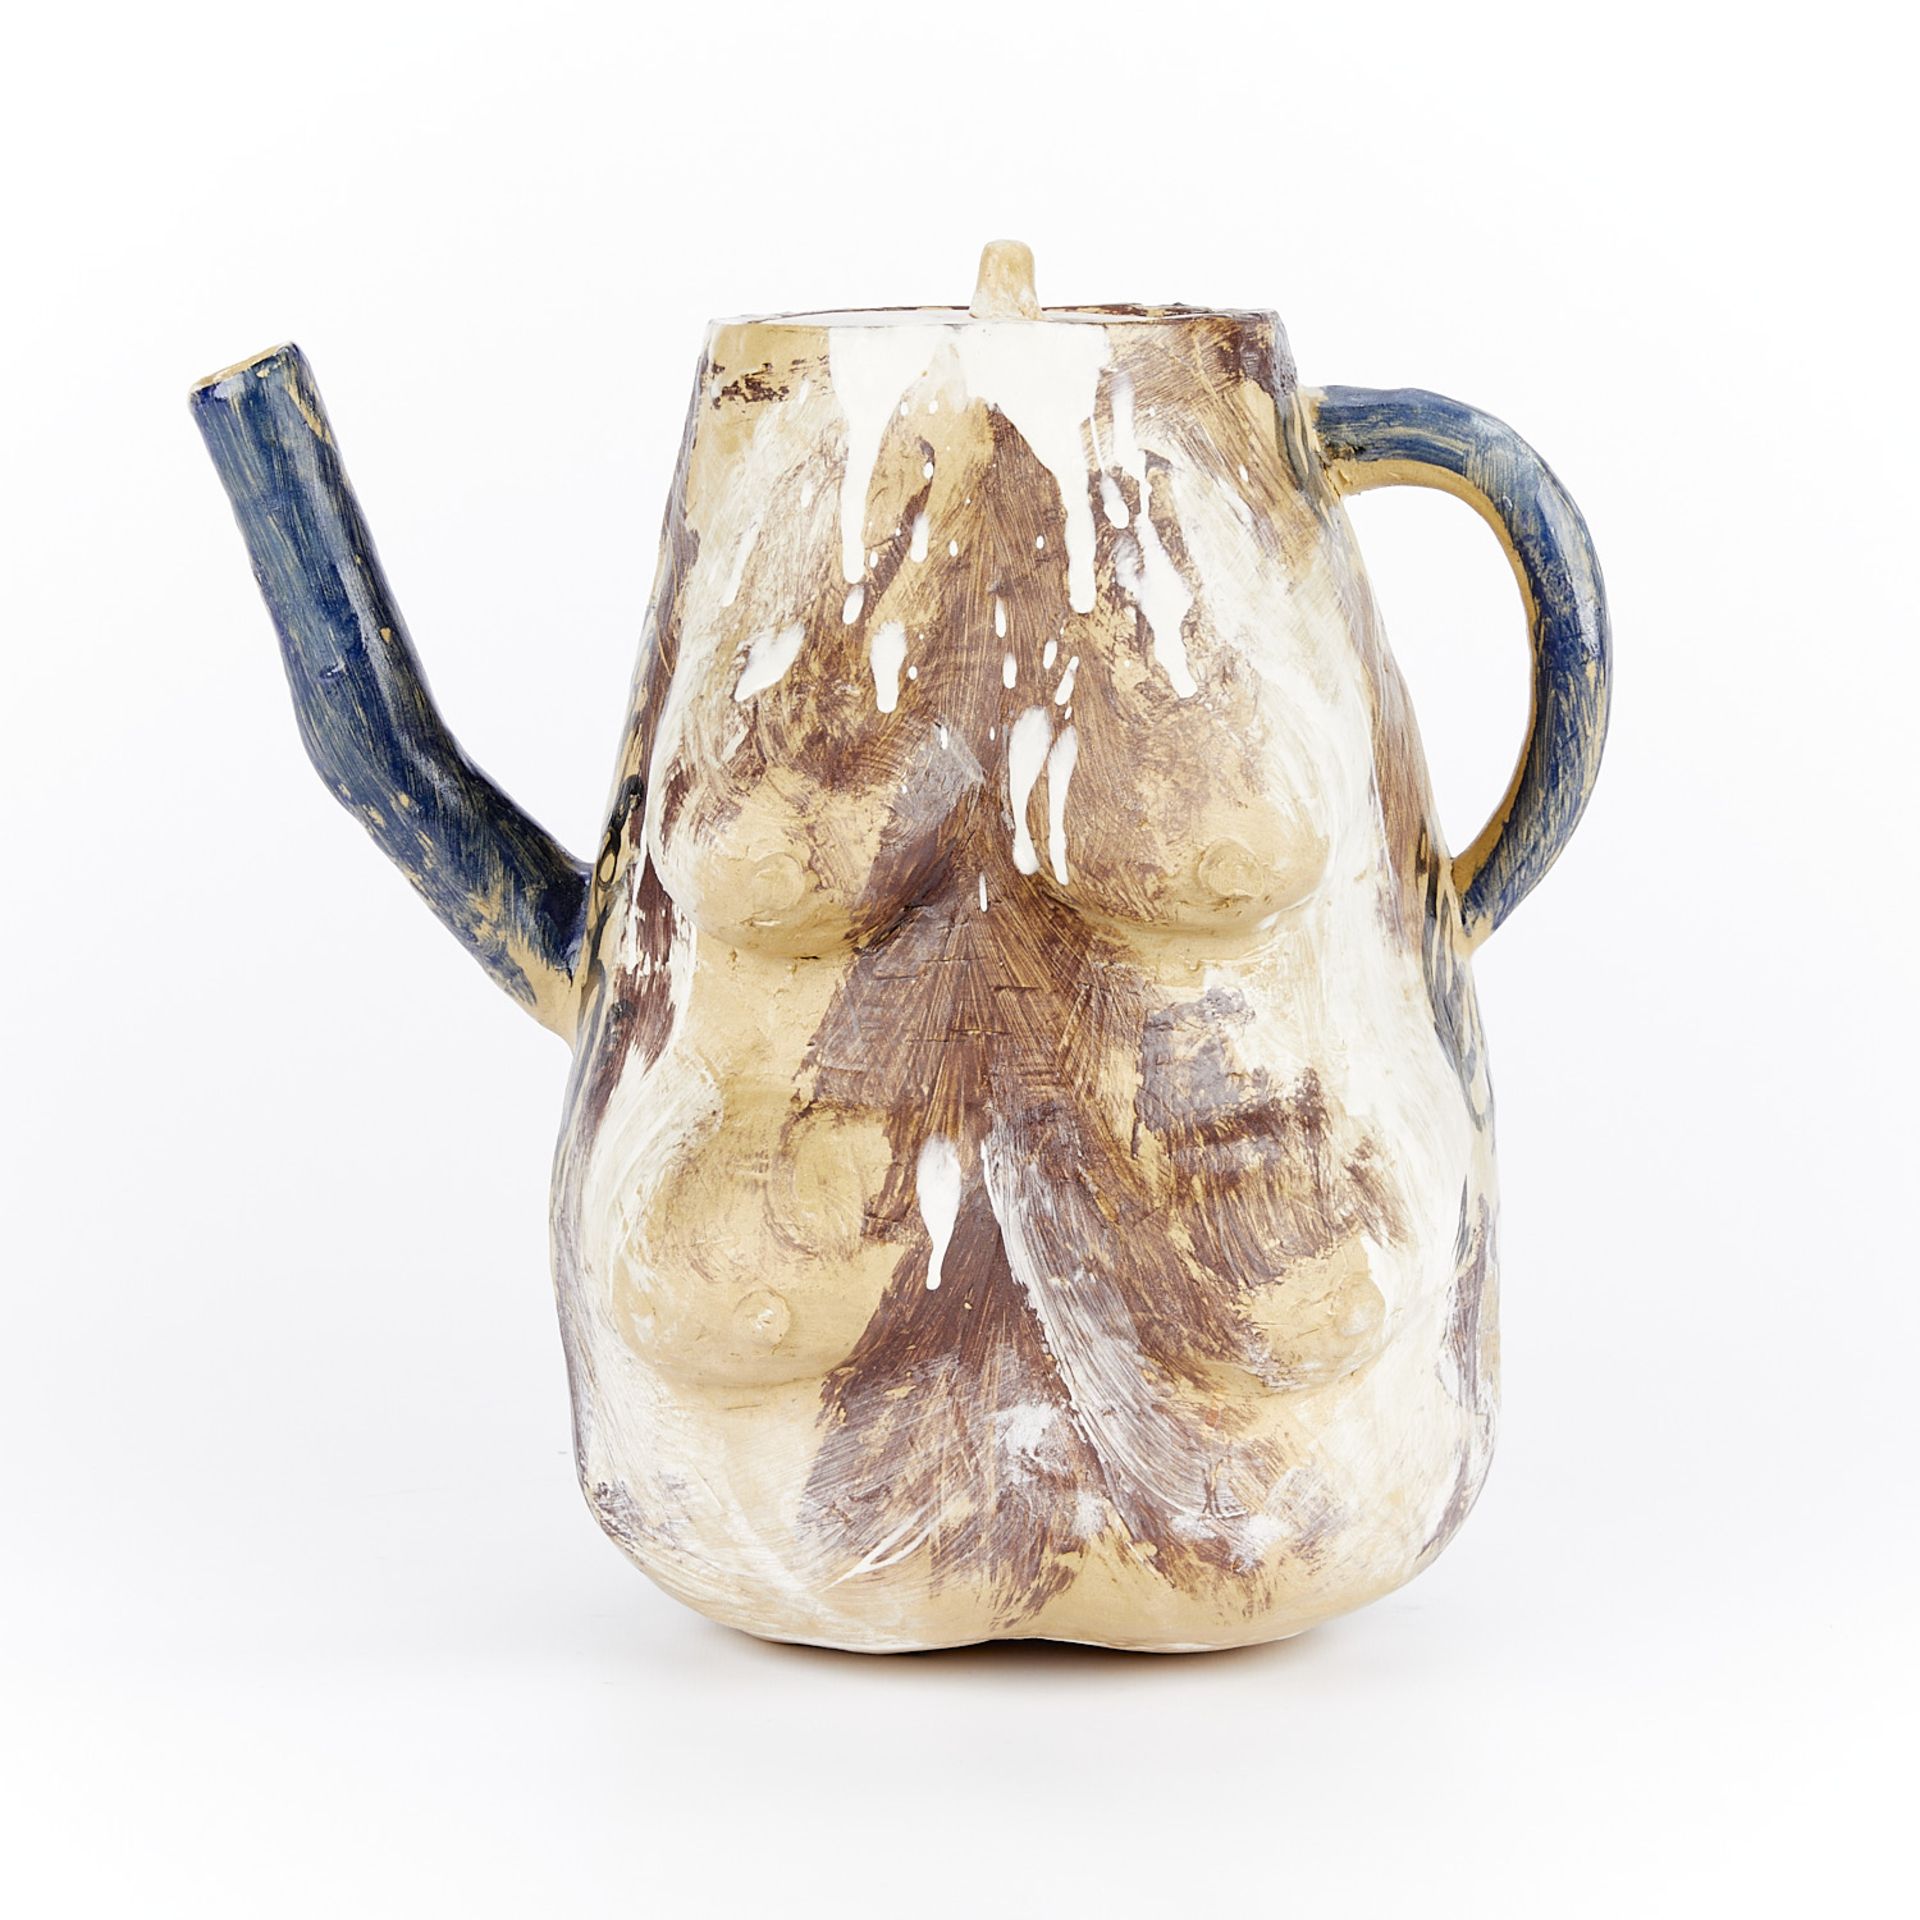 Laure Prouvost "Waiting for Grandad" Teapot - Image 4 of 13